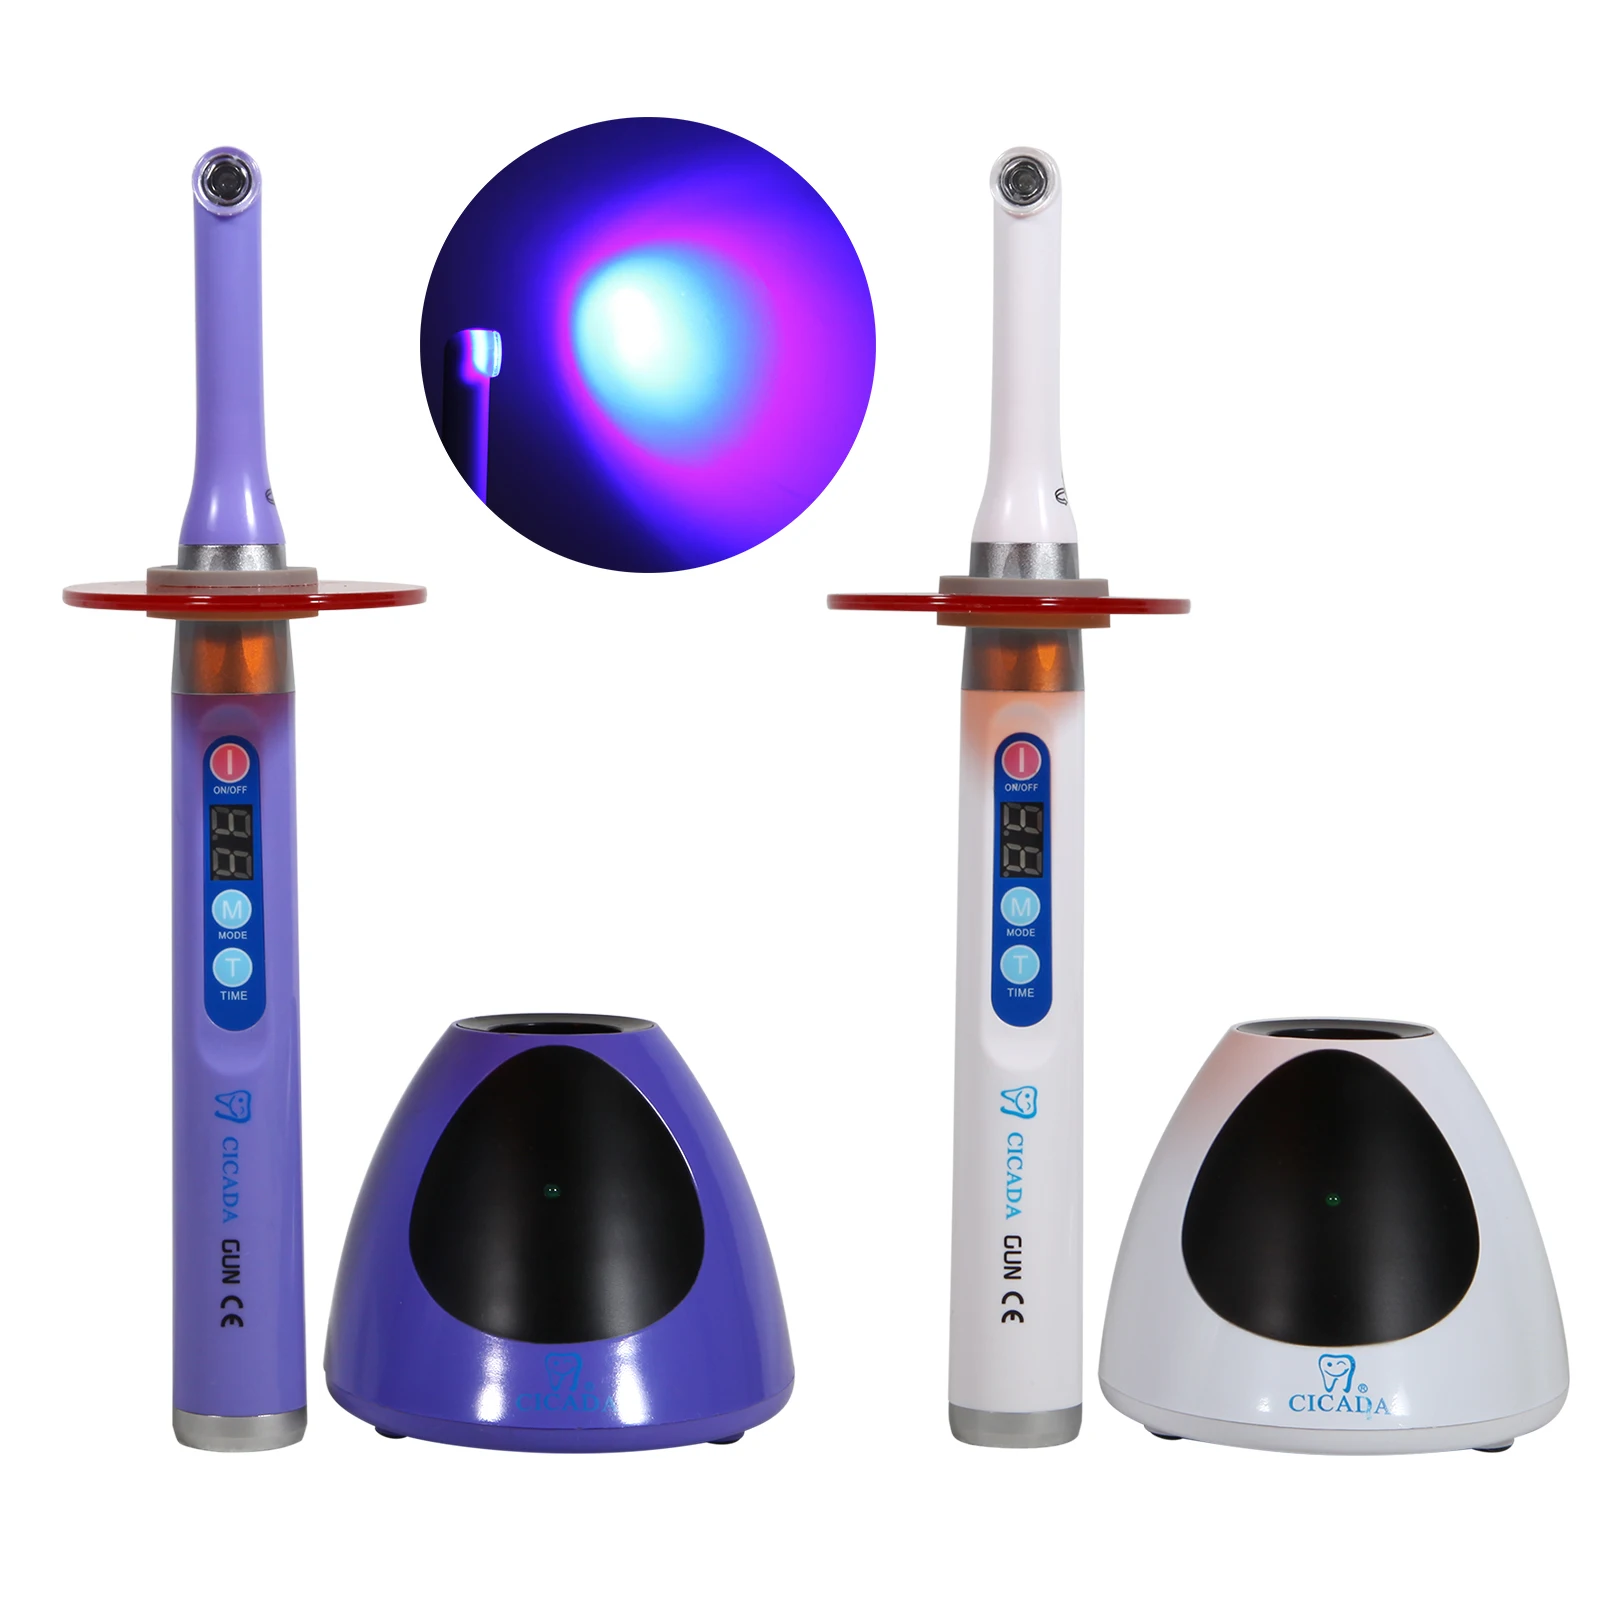 

Dental LED Wireless LED Curing Light Lamp 2300MW 1 Second Cure Handpiece Constant Power Output White/Purple